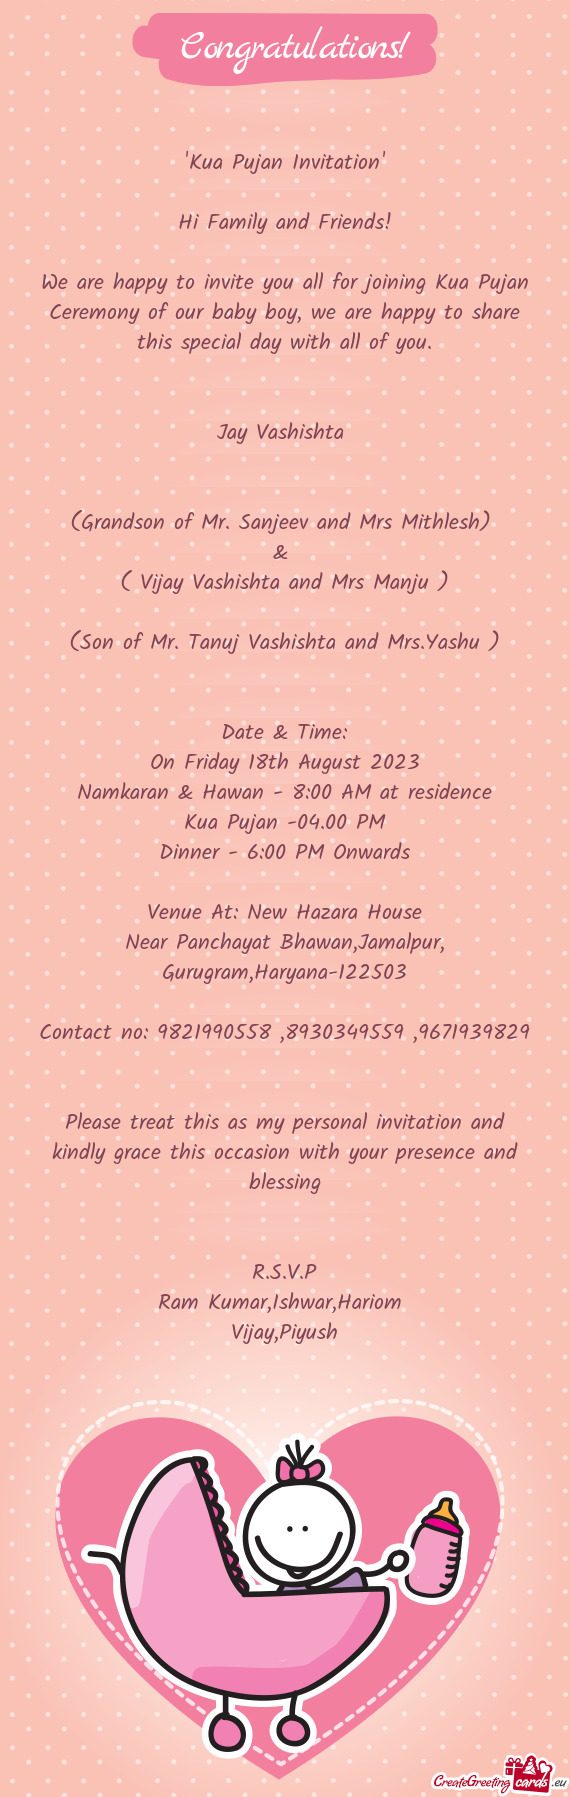 We are happy to invite you all for joining Kua Pujan Ceremony of our baby boy, we are happy to share